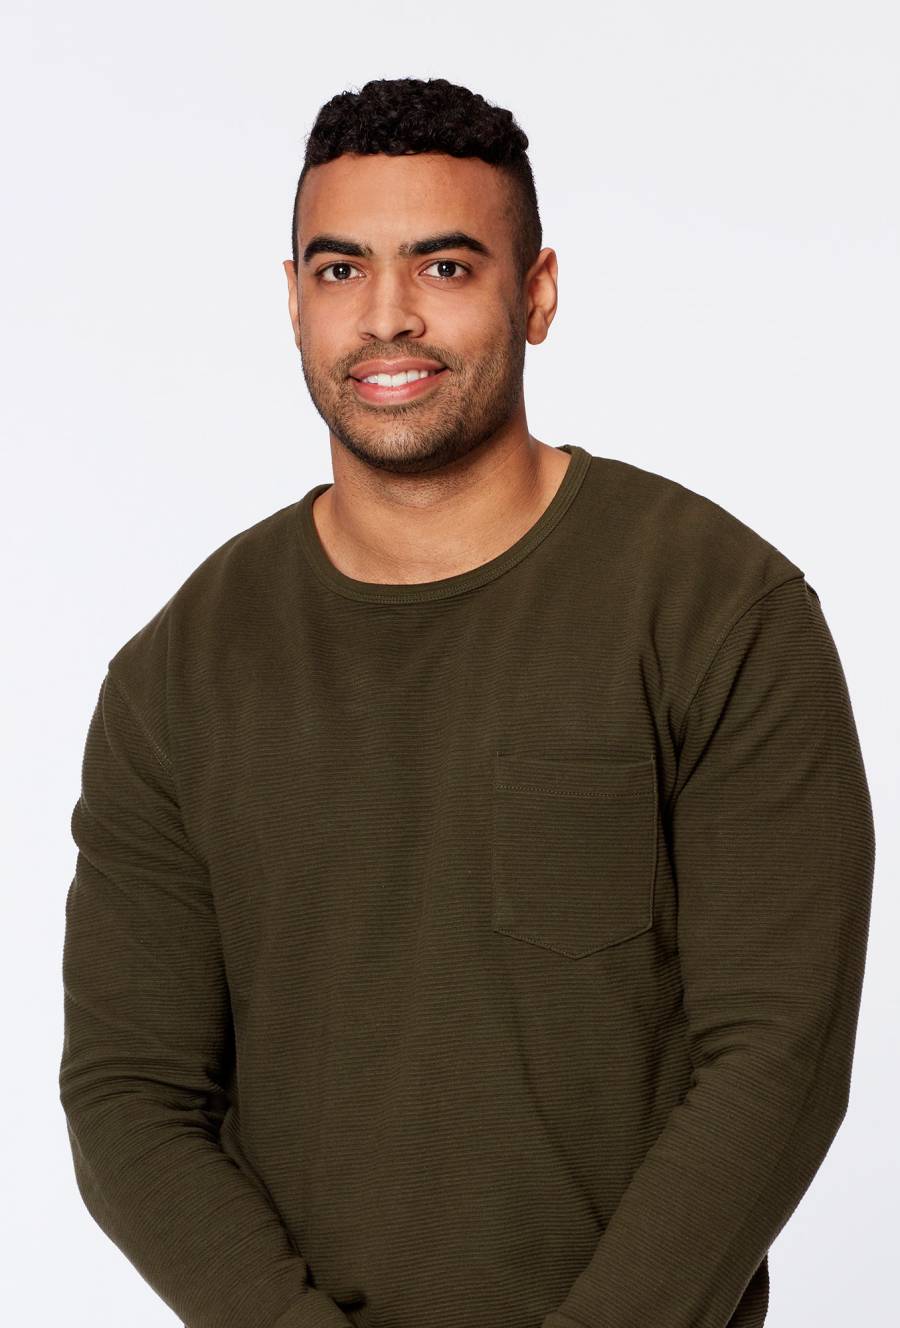 Justin Glaze Bachelor Nation Has Mixed Feelings About How The Bachelorette Handled Tino Rachel and Aven Drama